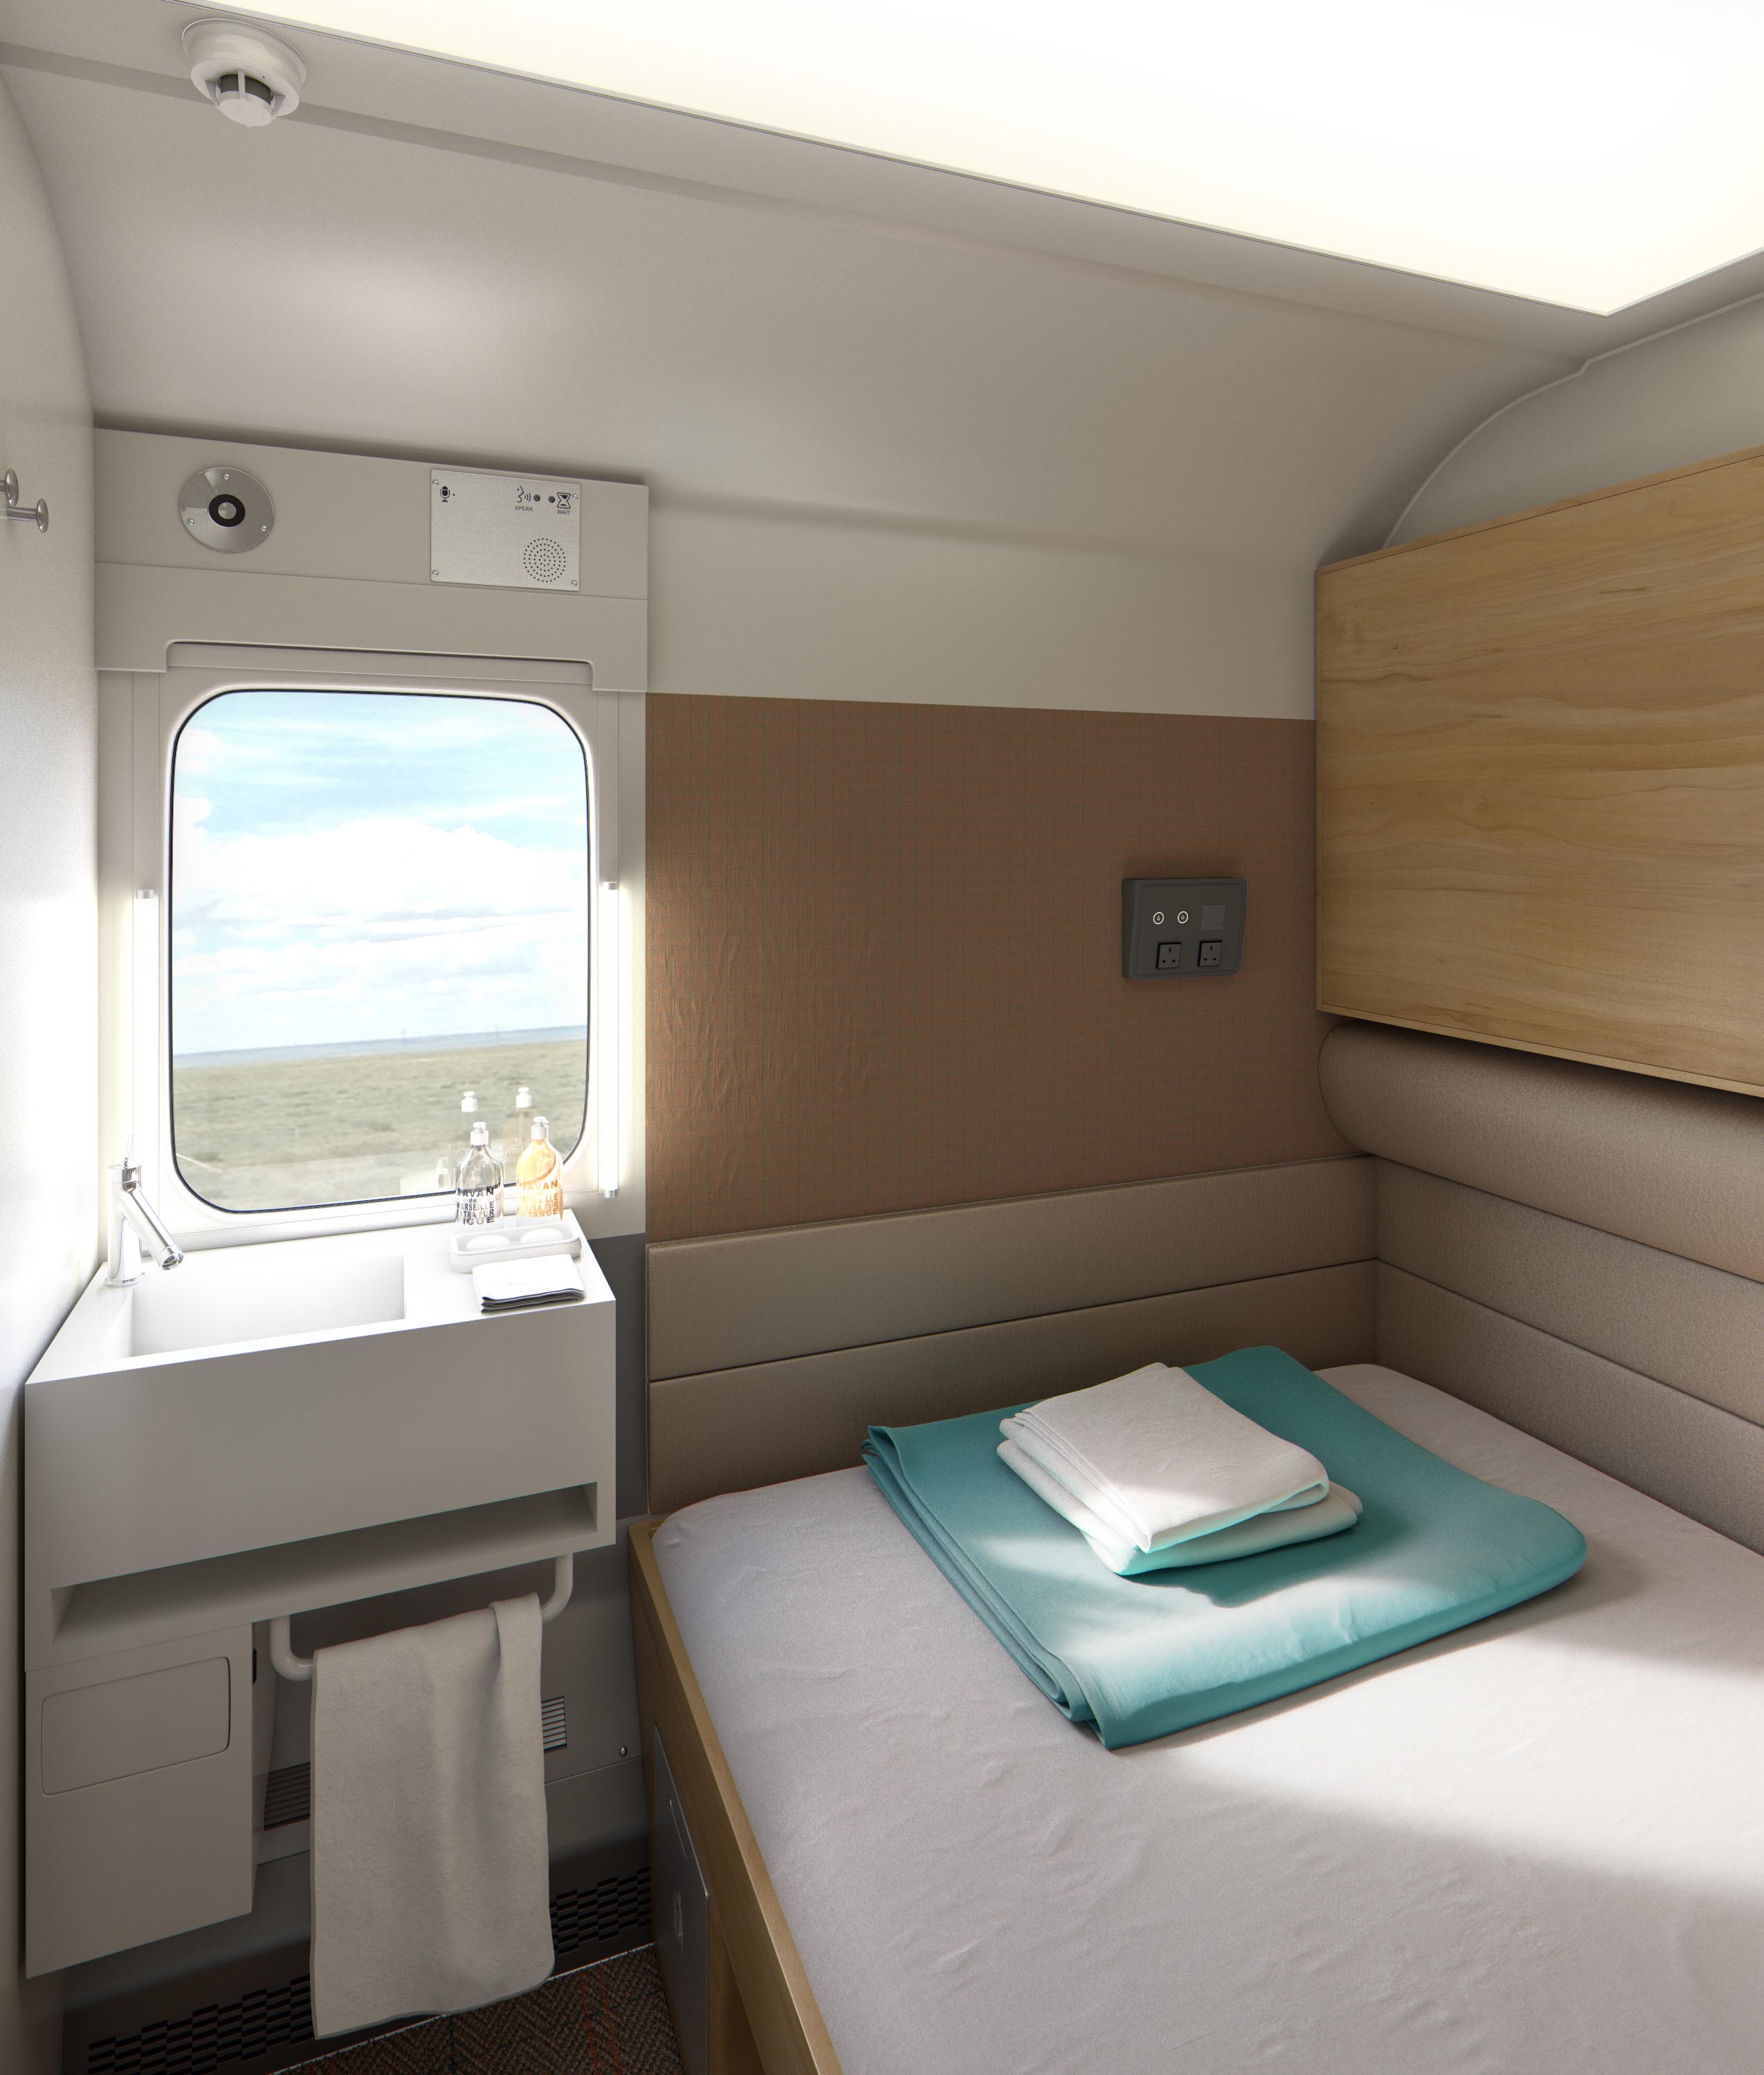 Caledonian Sleeper service previews its new accommodations - Economy